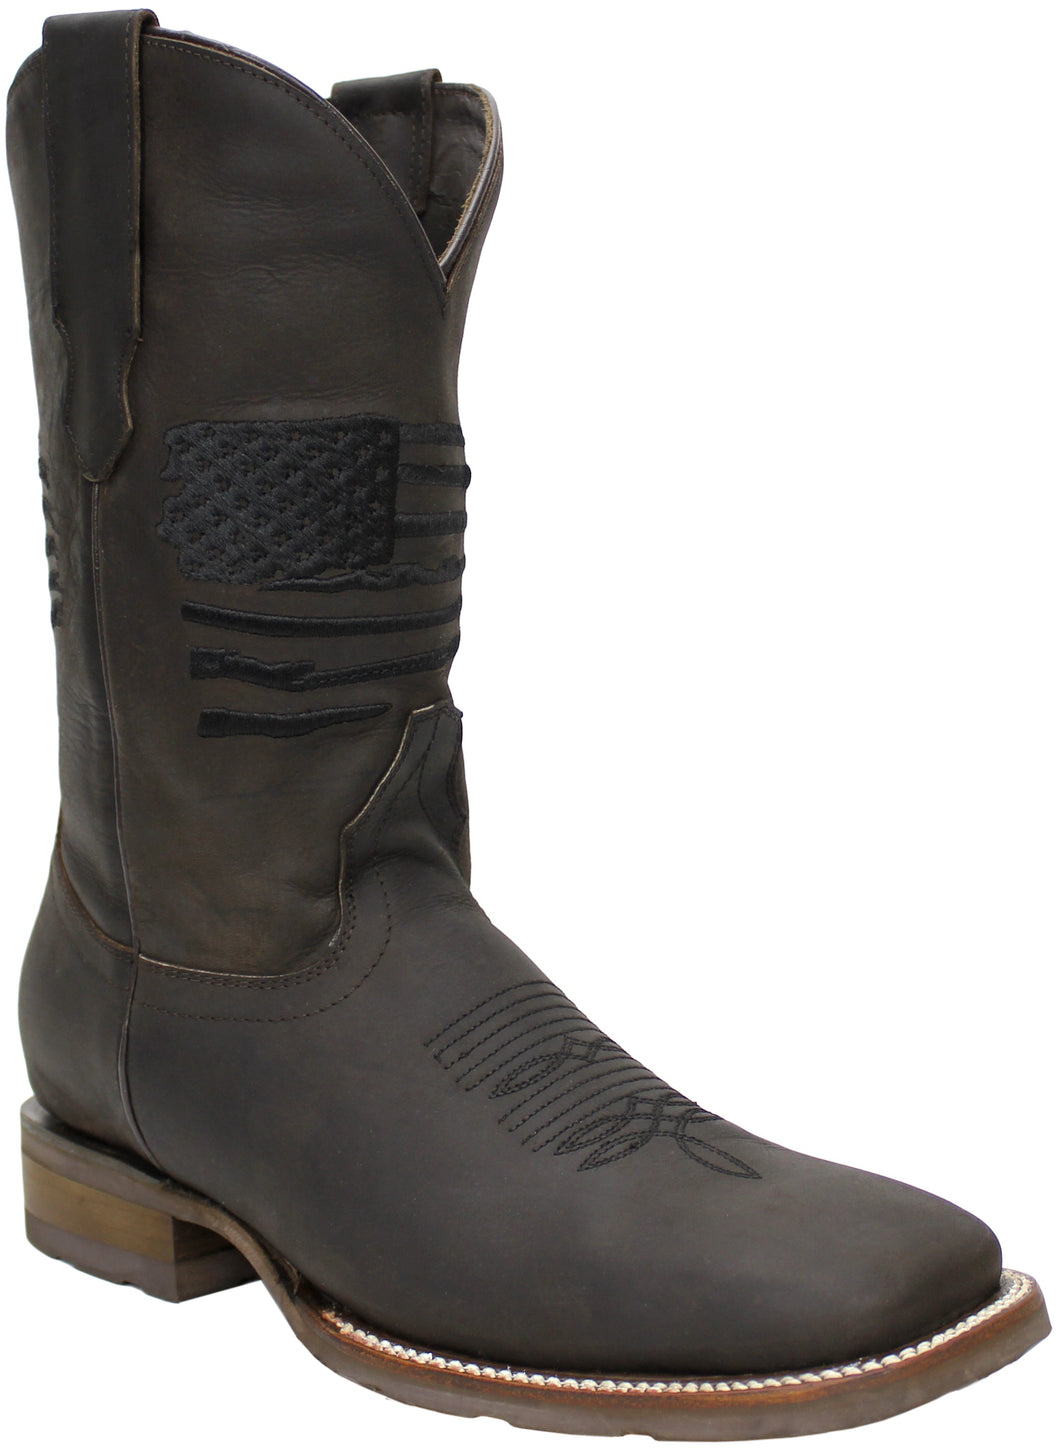 Silverton Patriot All Leather Wide Square Toe Boots (Chocolate)